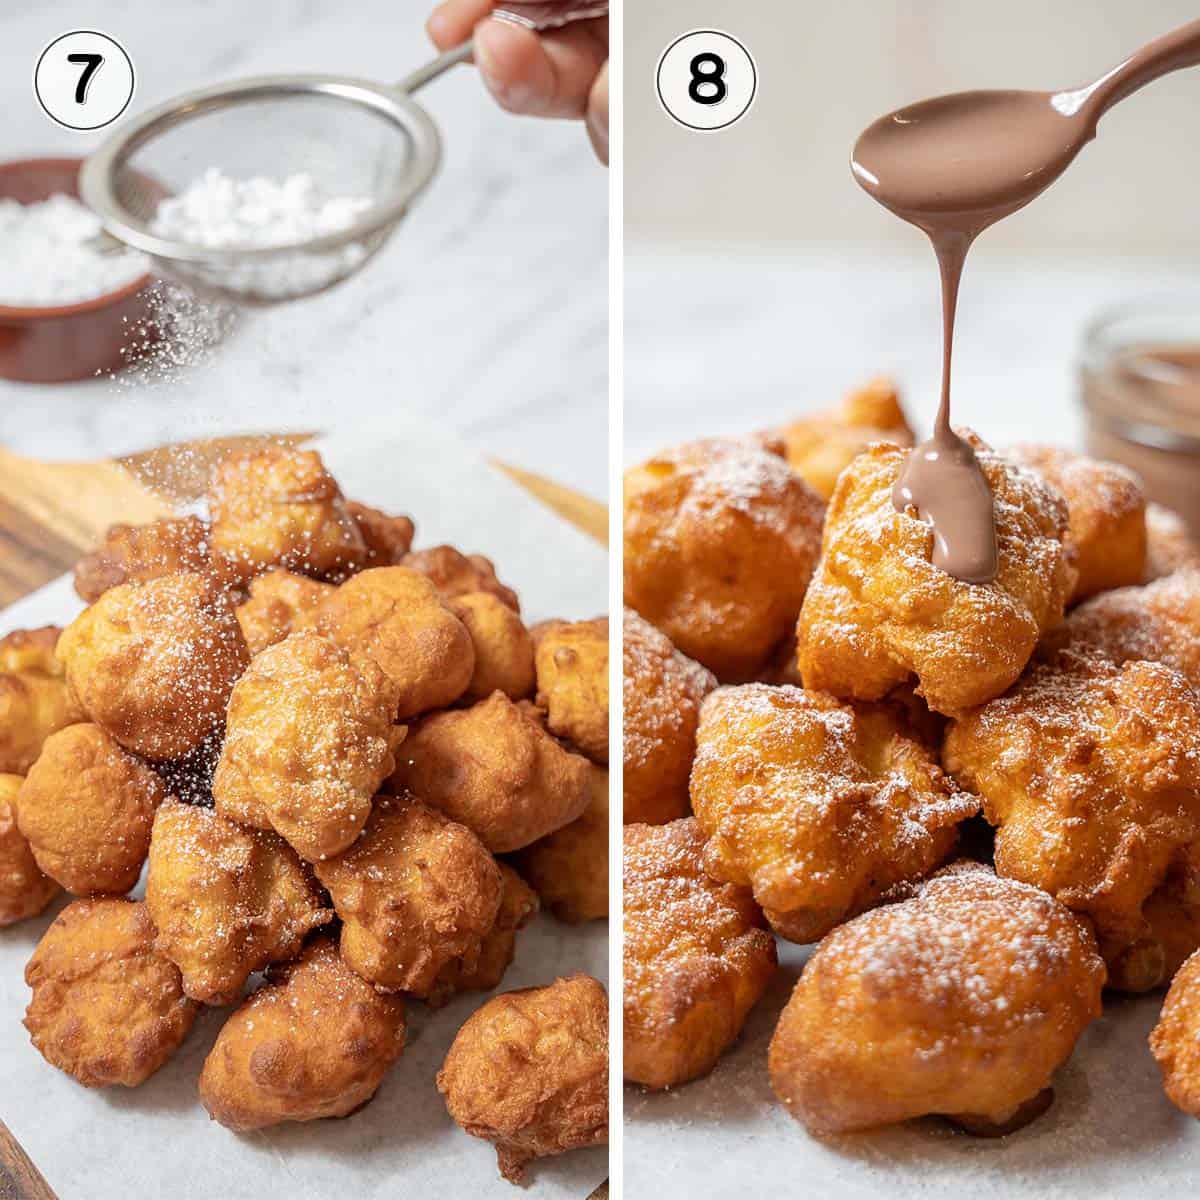 sprinkling the buñuelos with powdered sugar and drizzling with chocolate.